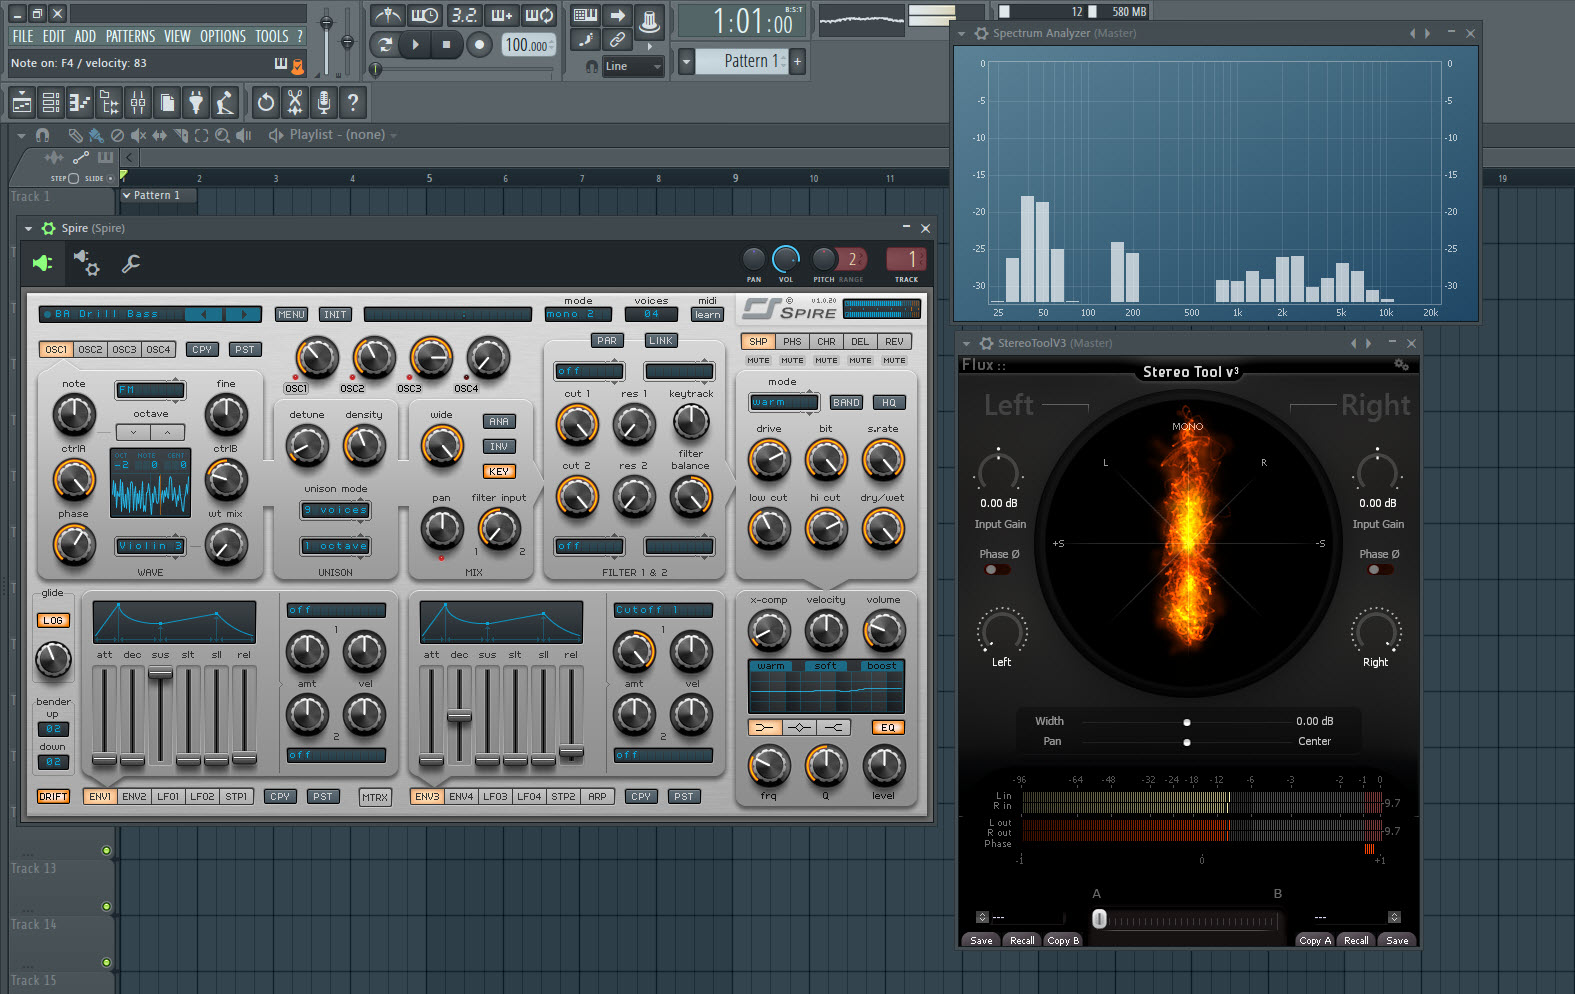 will the reveal spire work in fruity loops 12